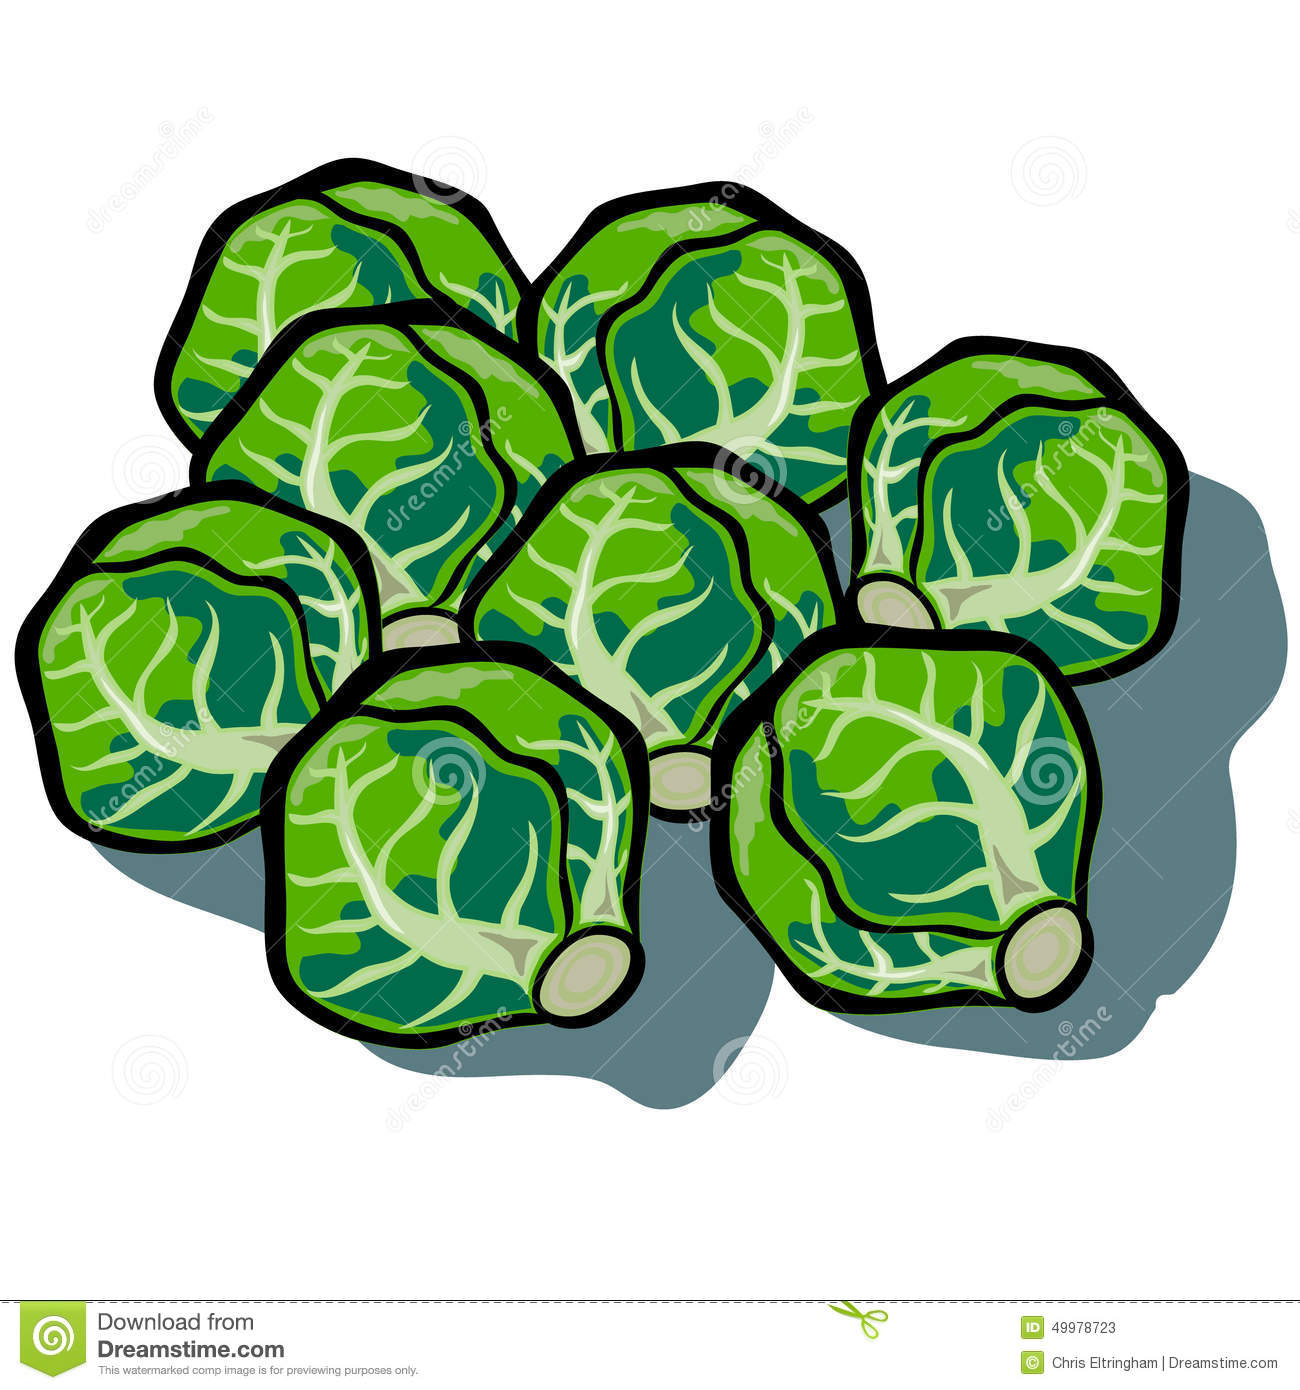 Brussels sprouts clipart 20 free Cliparts | Download images on